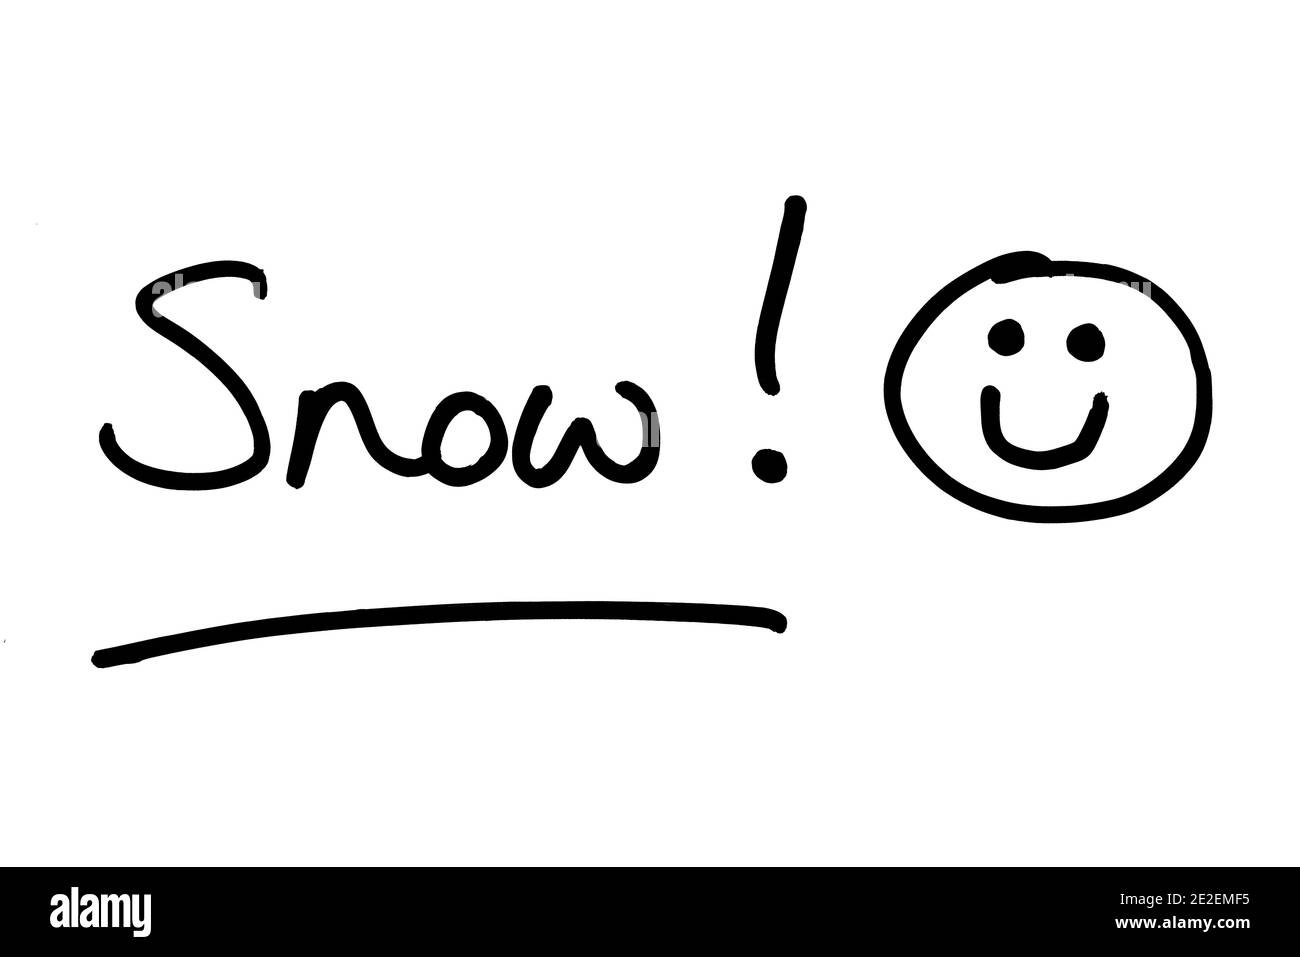 The word Snow! handwritten on a white background. Stock Photo